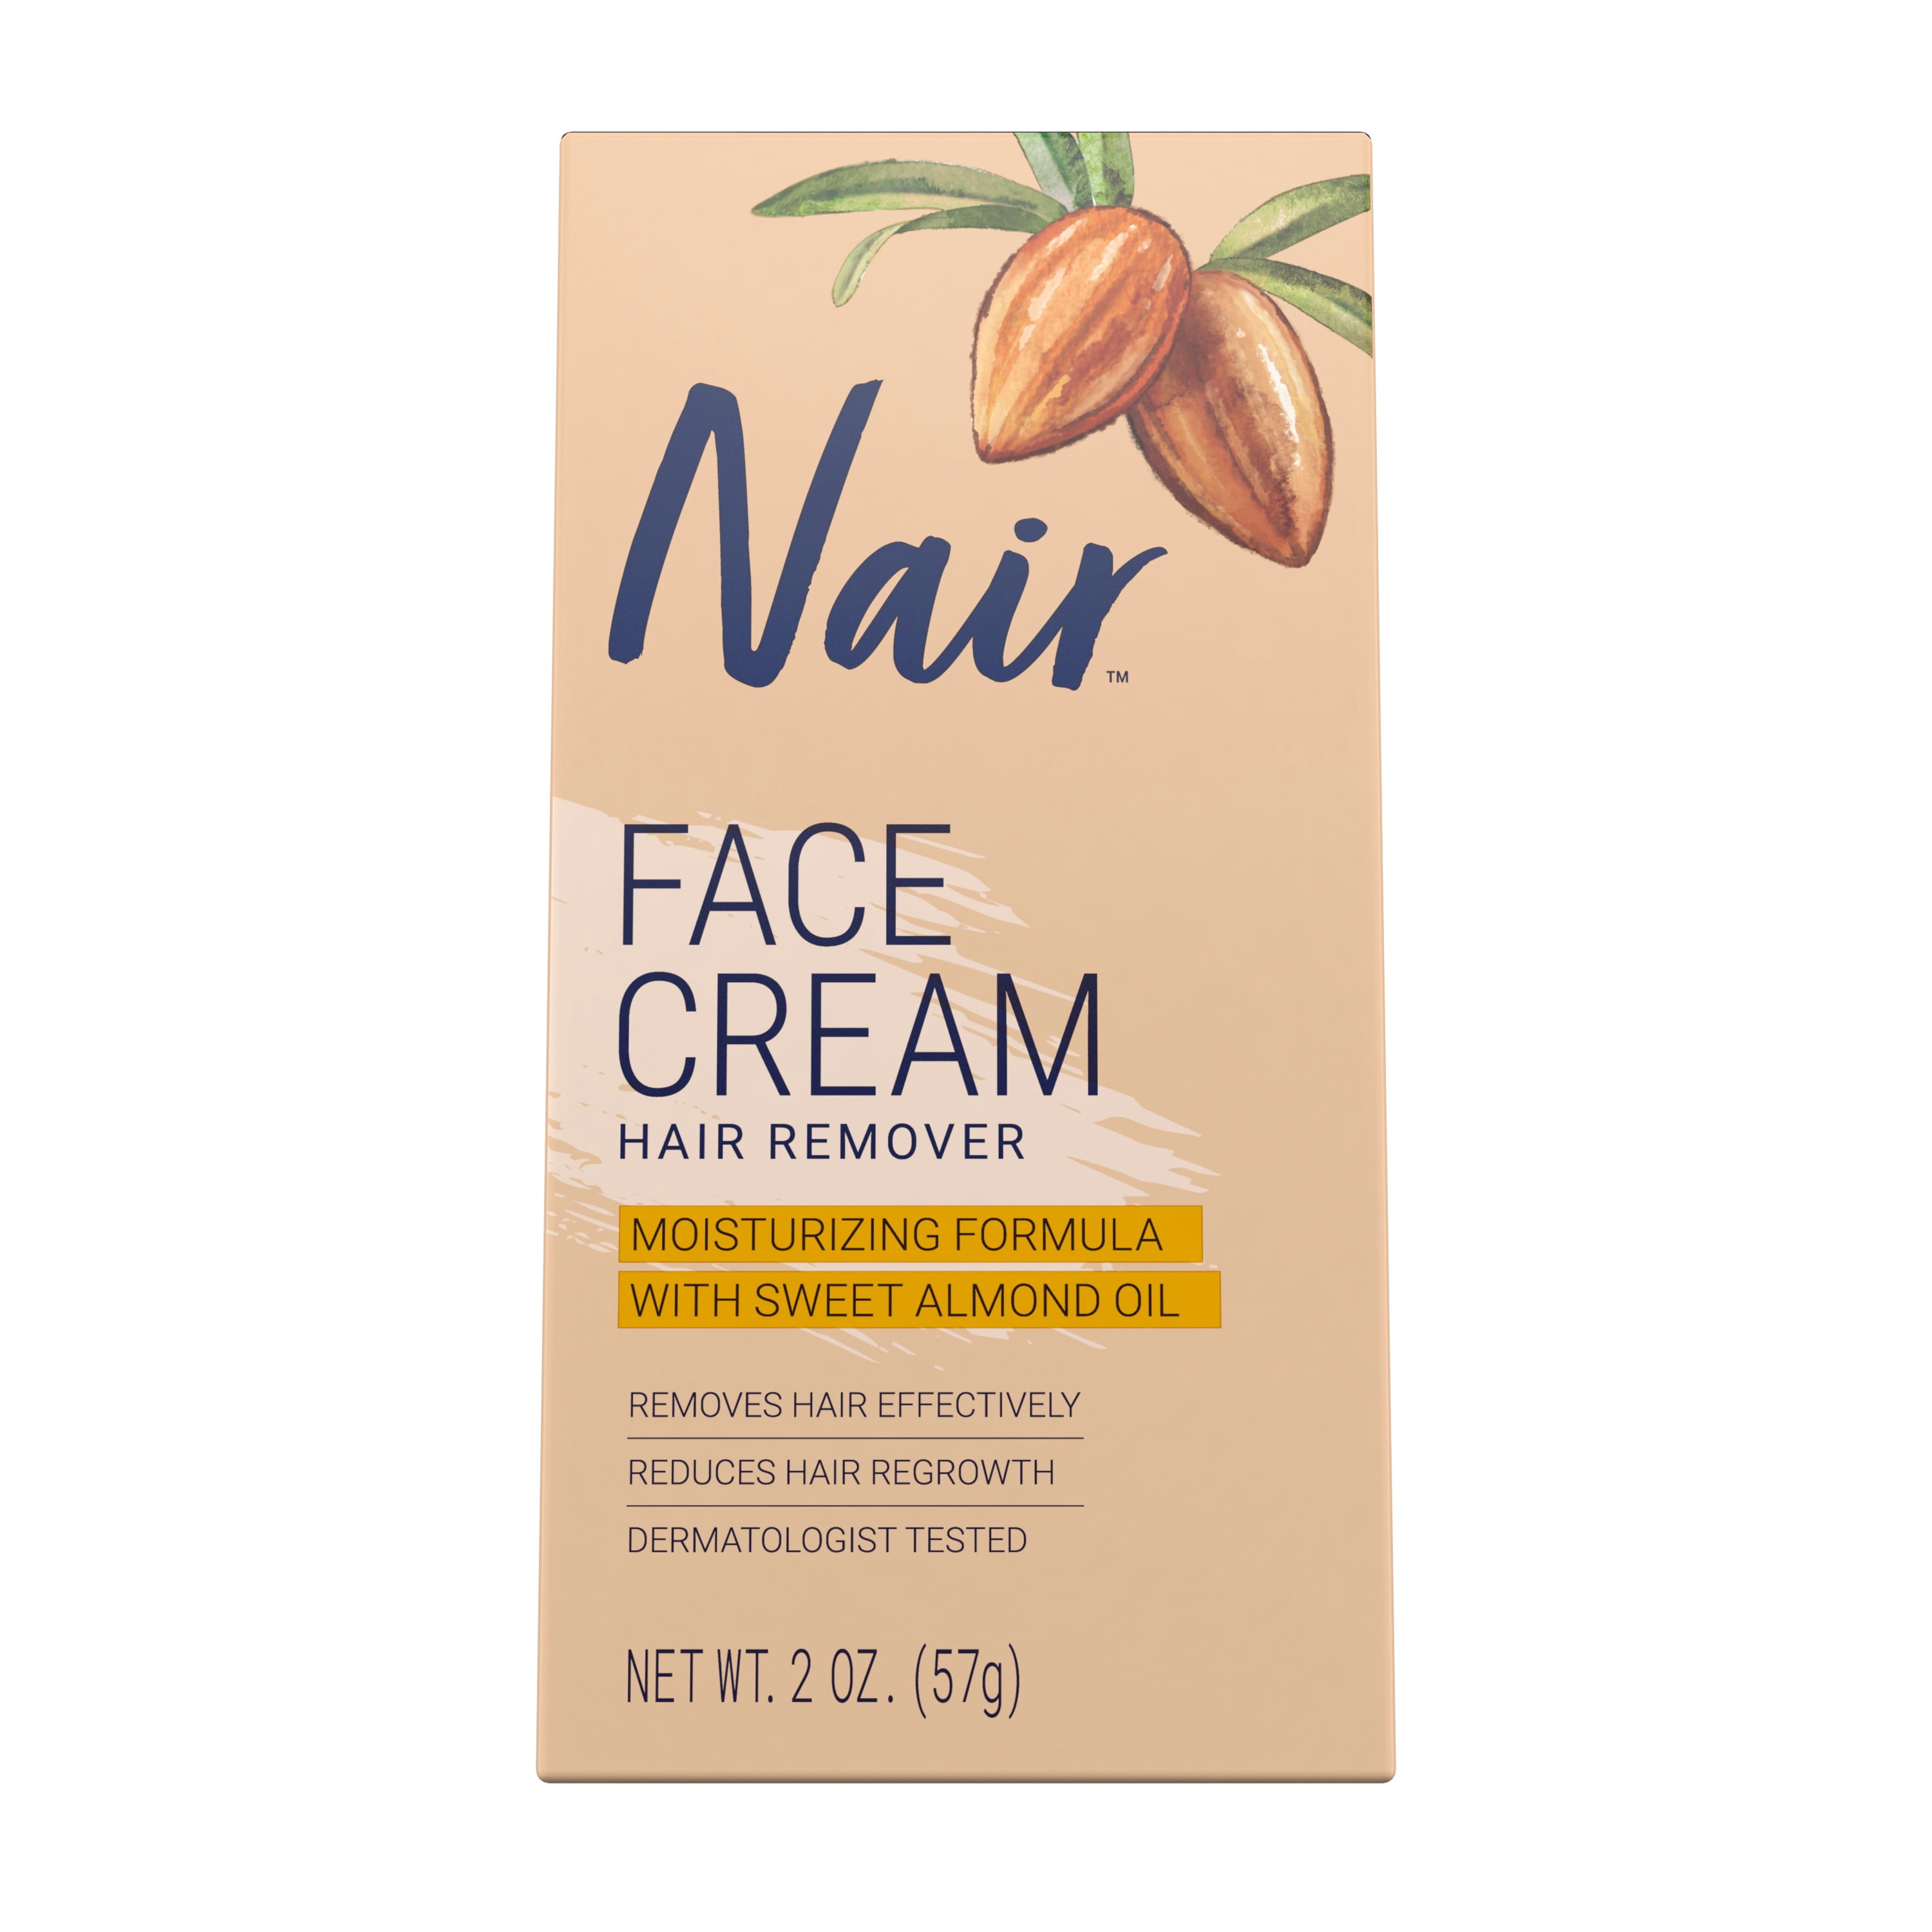 Nair Moisturizing Facial Hair Removal Cream With Sweet Almond Oil, #1 Depilatory Cream For Face, 2 oz Bottle, For All Skin Types pic